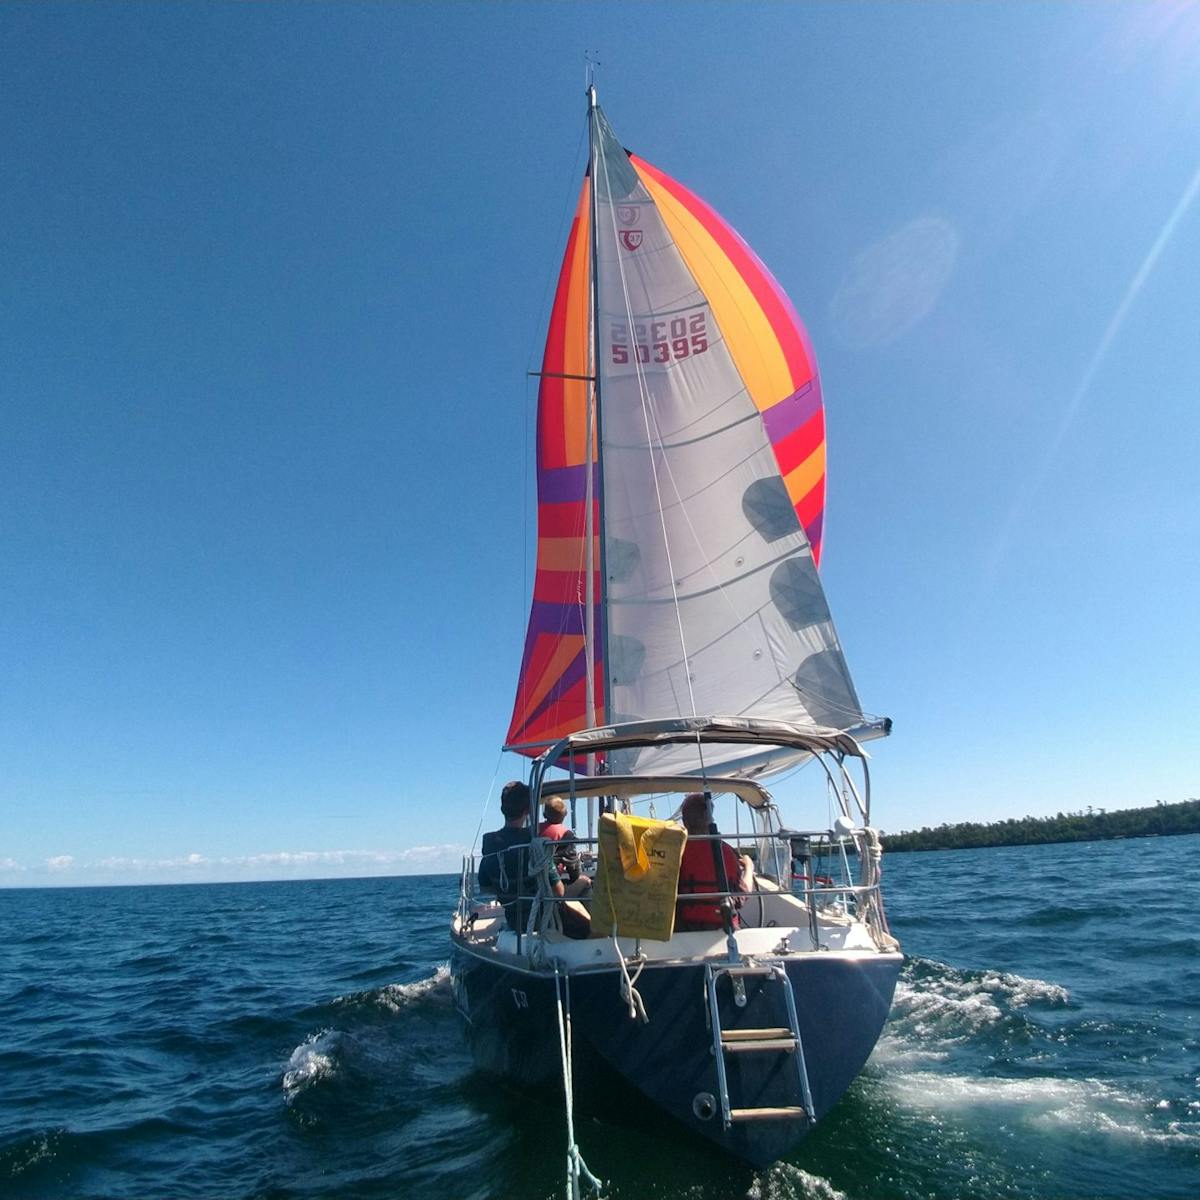 Under full sail, Vahevala's brightly colored spinnaker propels her to the horizon.